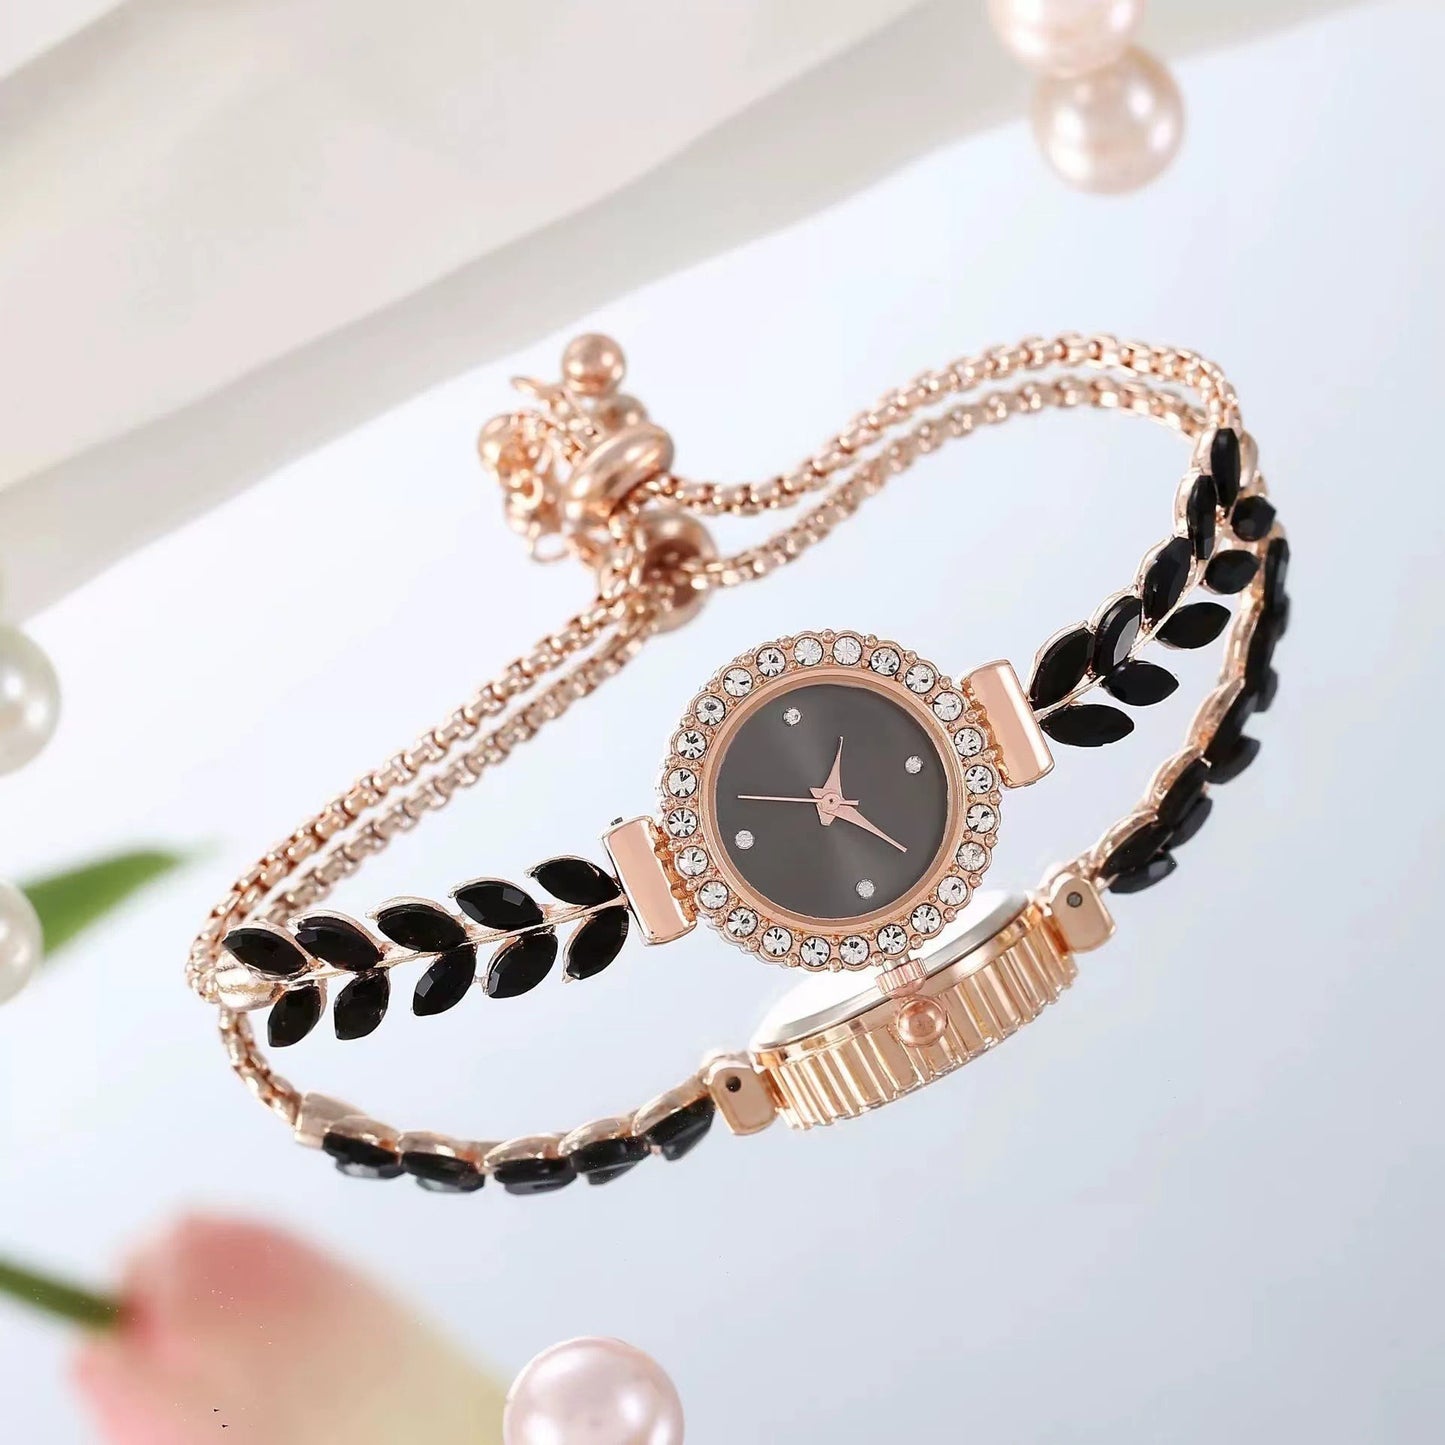 New Fashion Leaf Pulling Rope Women's Bracelet Watch with Diamonds, Small and Comfortable Temperament, Free Adjustment Women's Quartz Watch